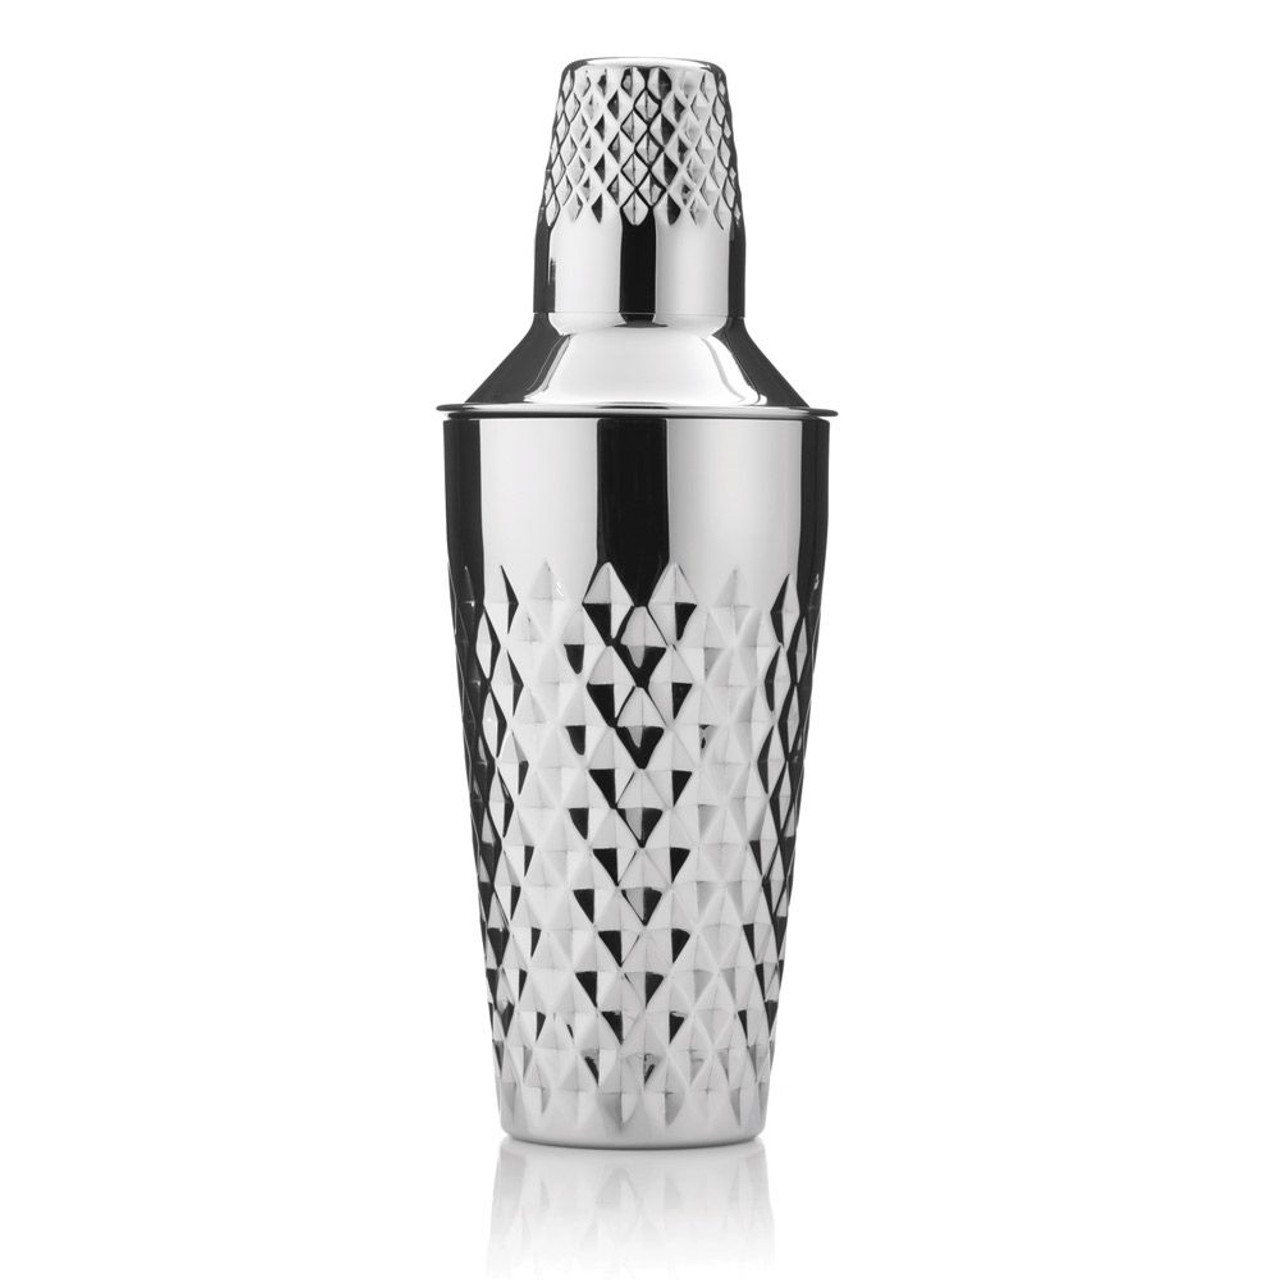 Final Touch Glass Cocktail Shaker with Stainless Steel Lid & Recipes - 16 oz